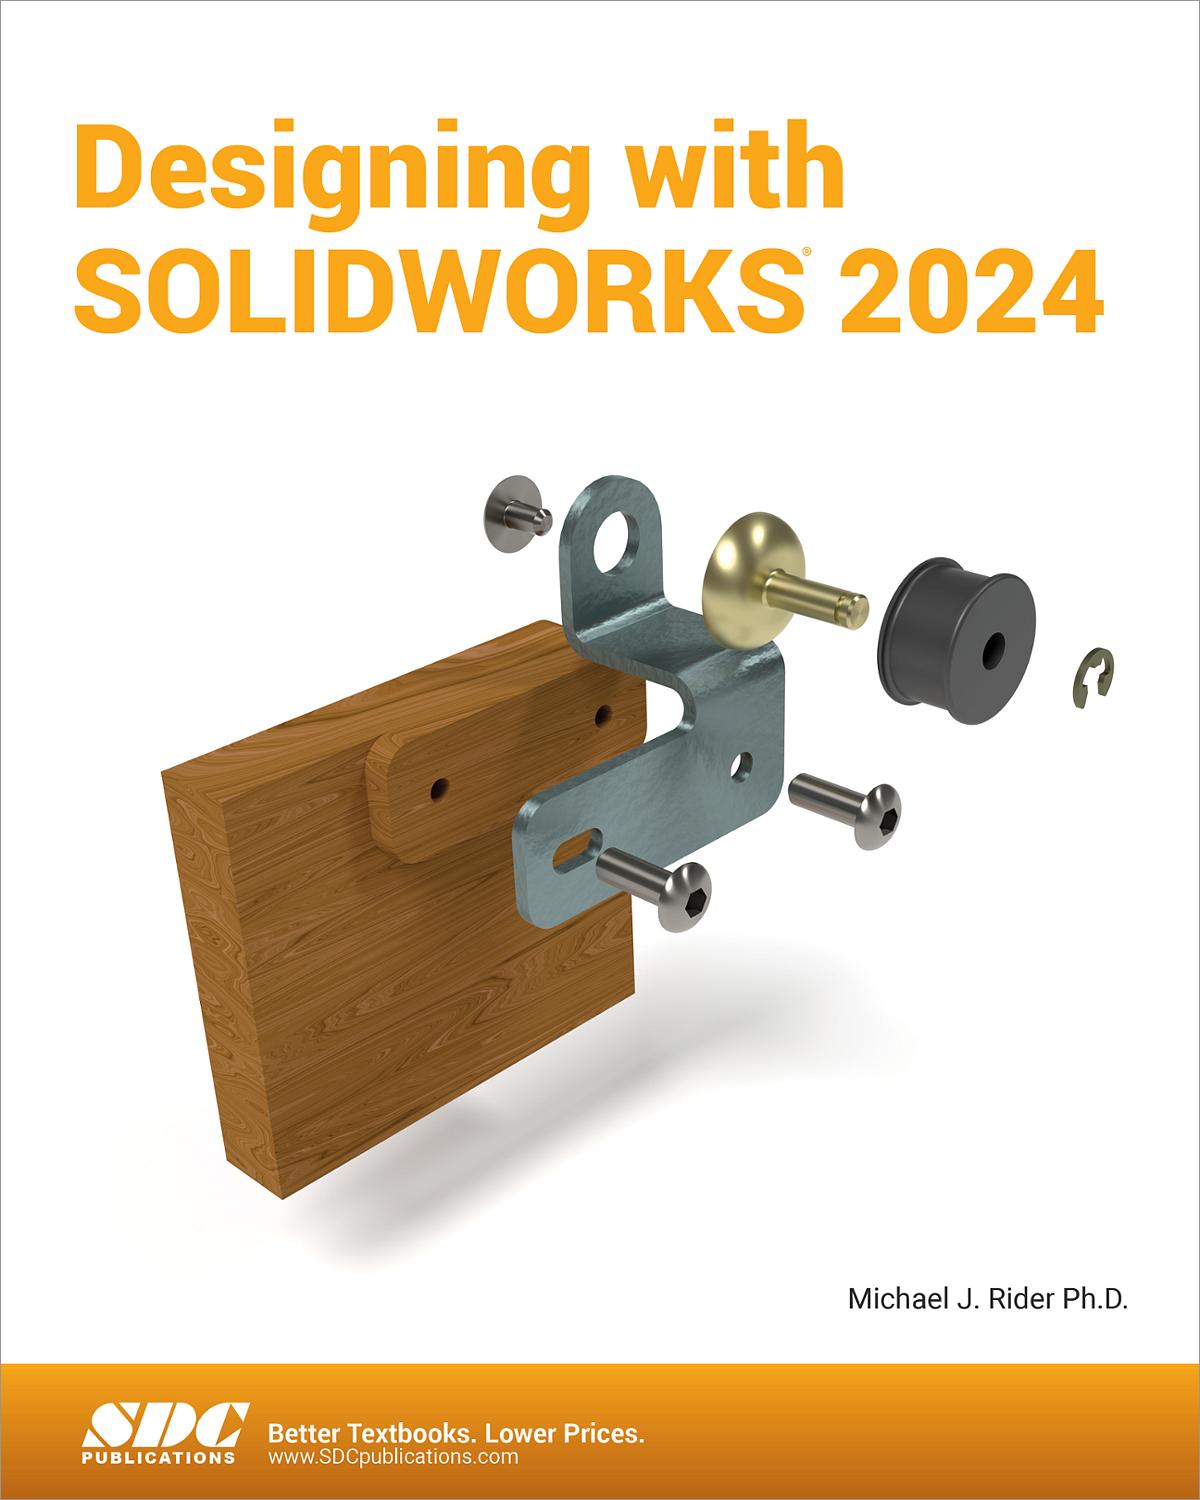 Designing with SOLIDWORKS 2024, Book 9781630576516 SDC Publications